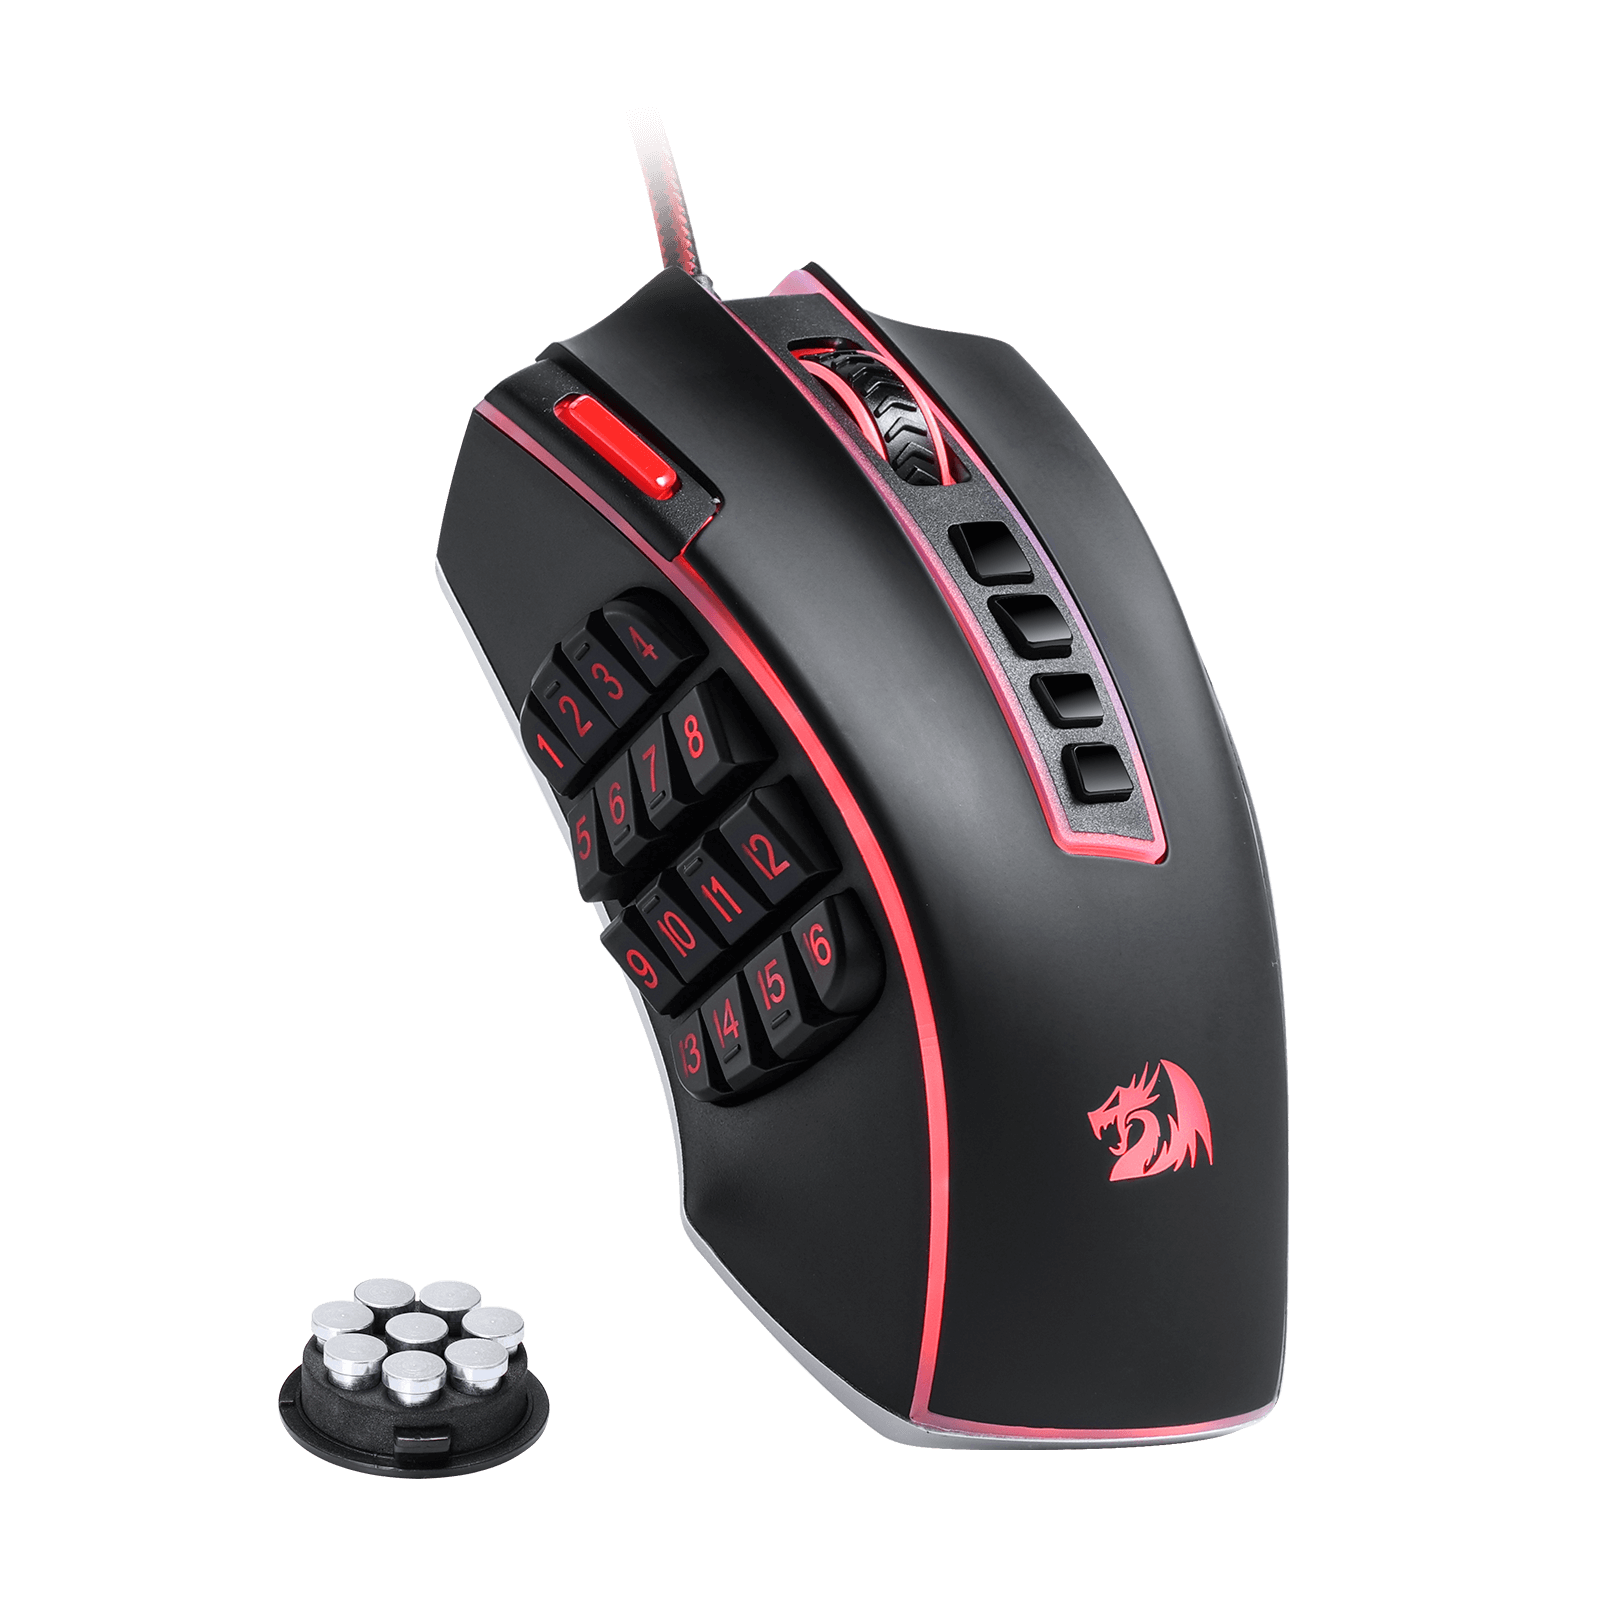 Redragon Legend Chroma M990 MMO Gaming Mouse –